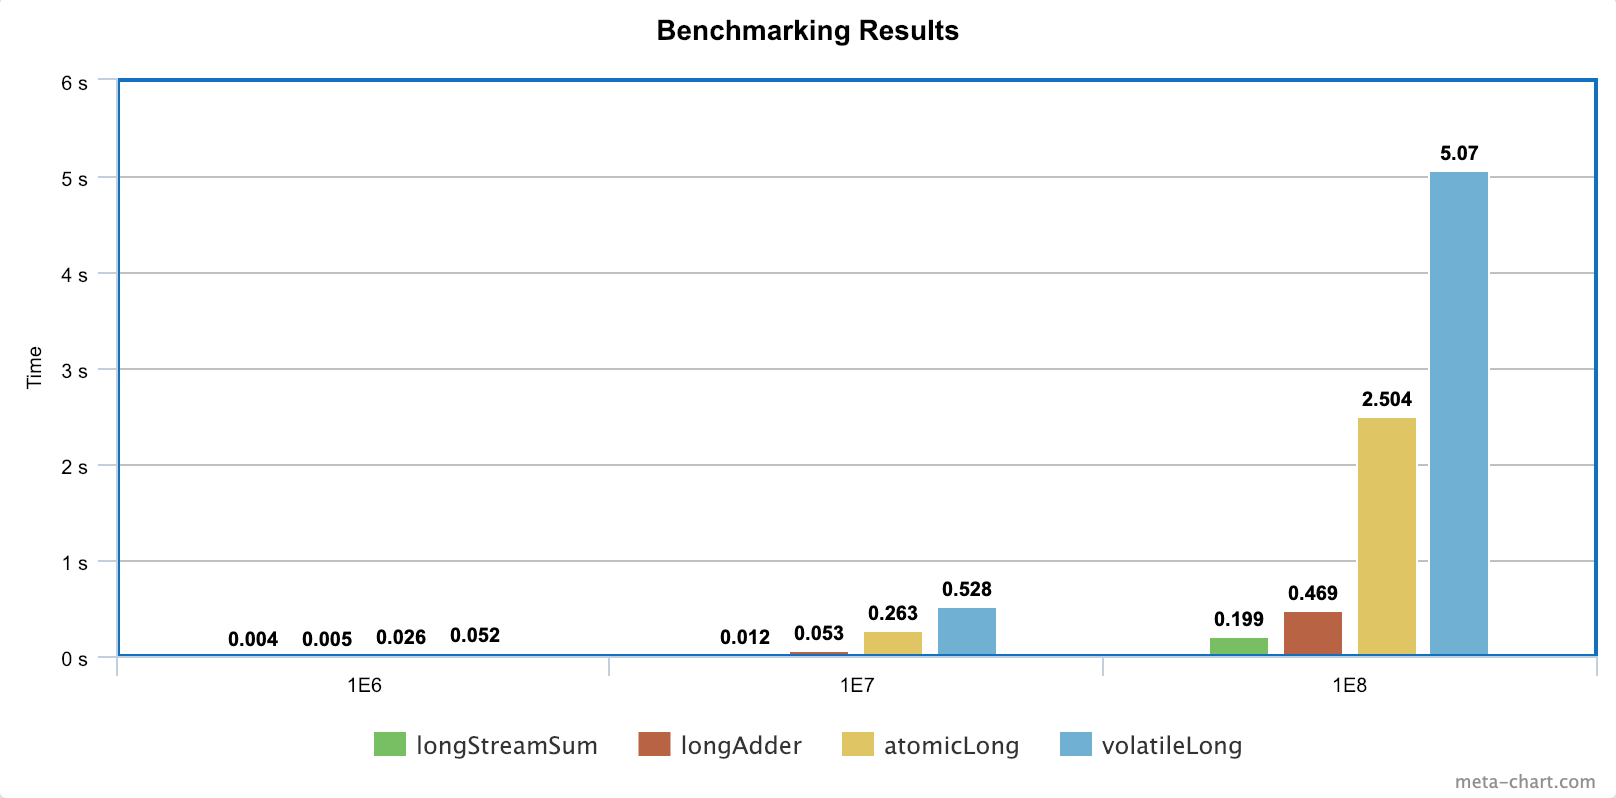 Benchmarking Results